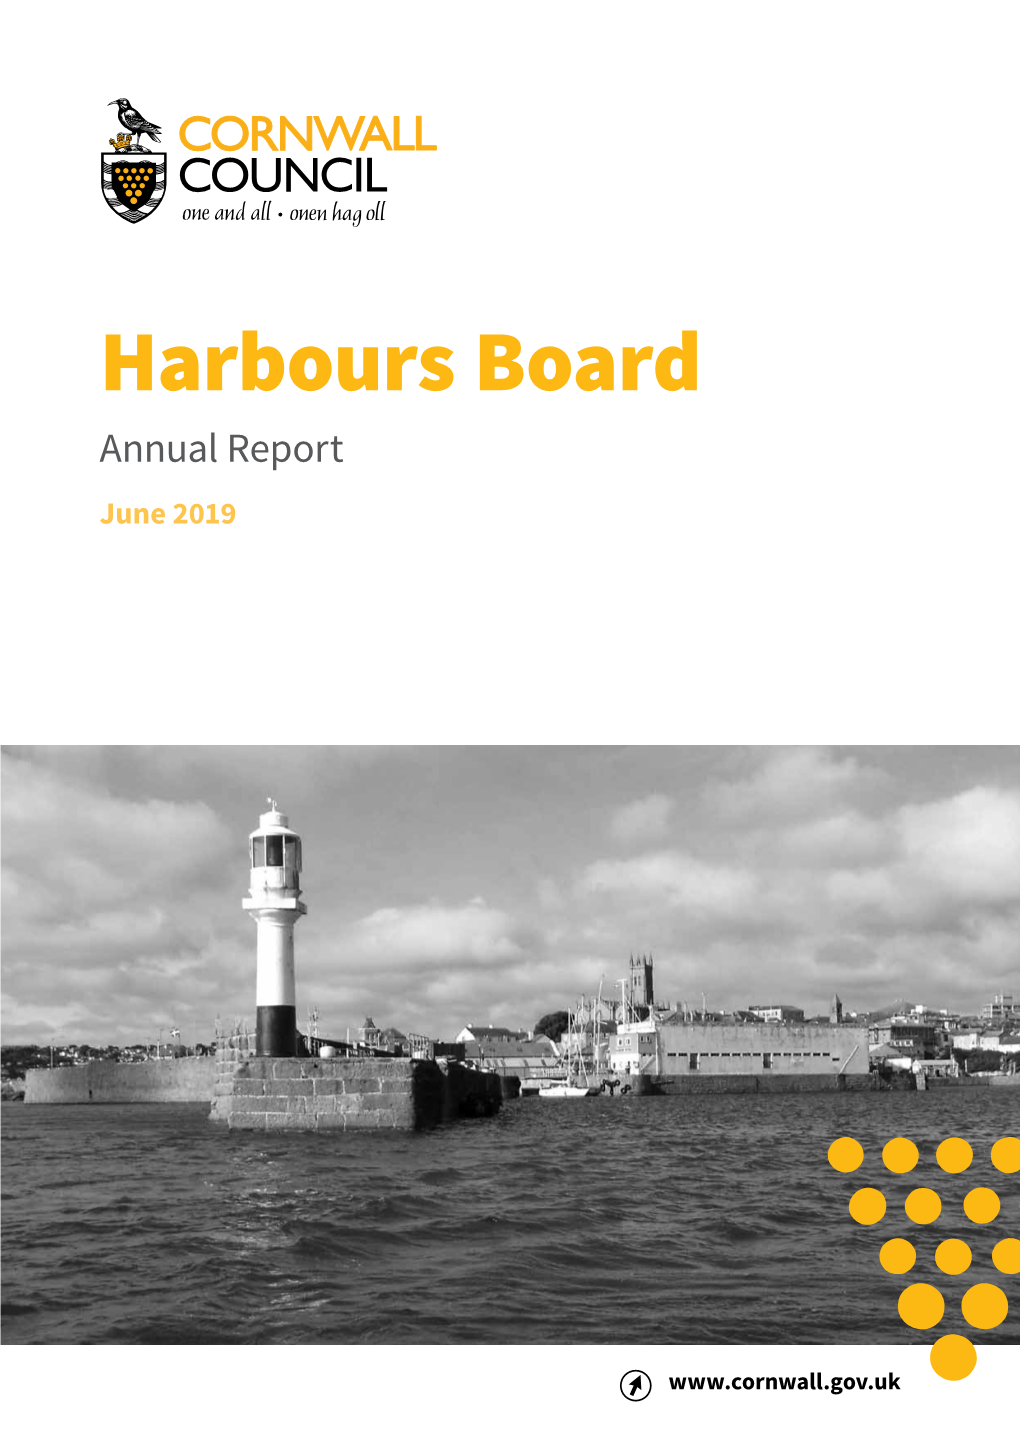 Harbours Board Annual Report 2019